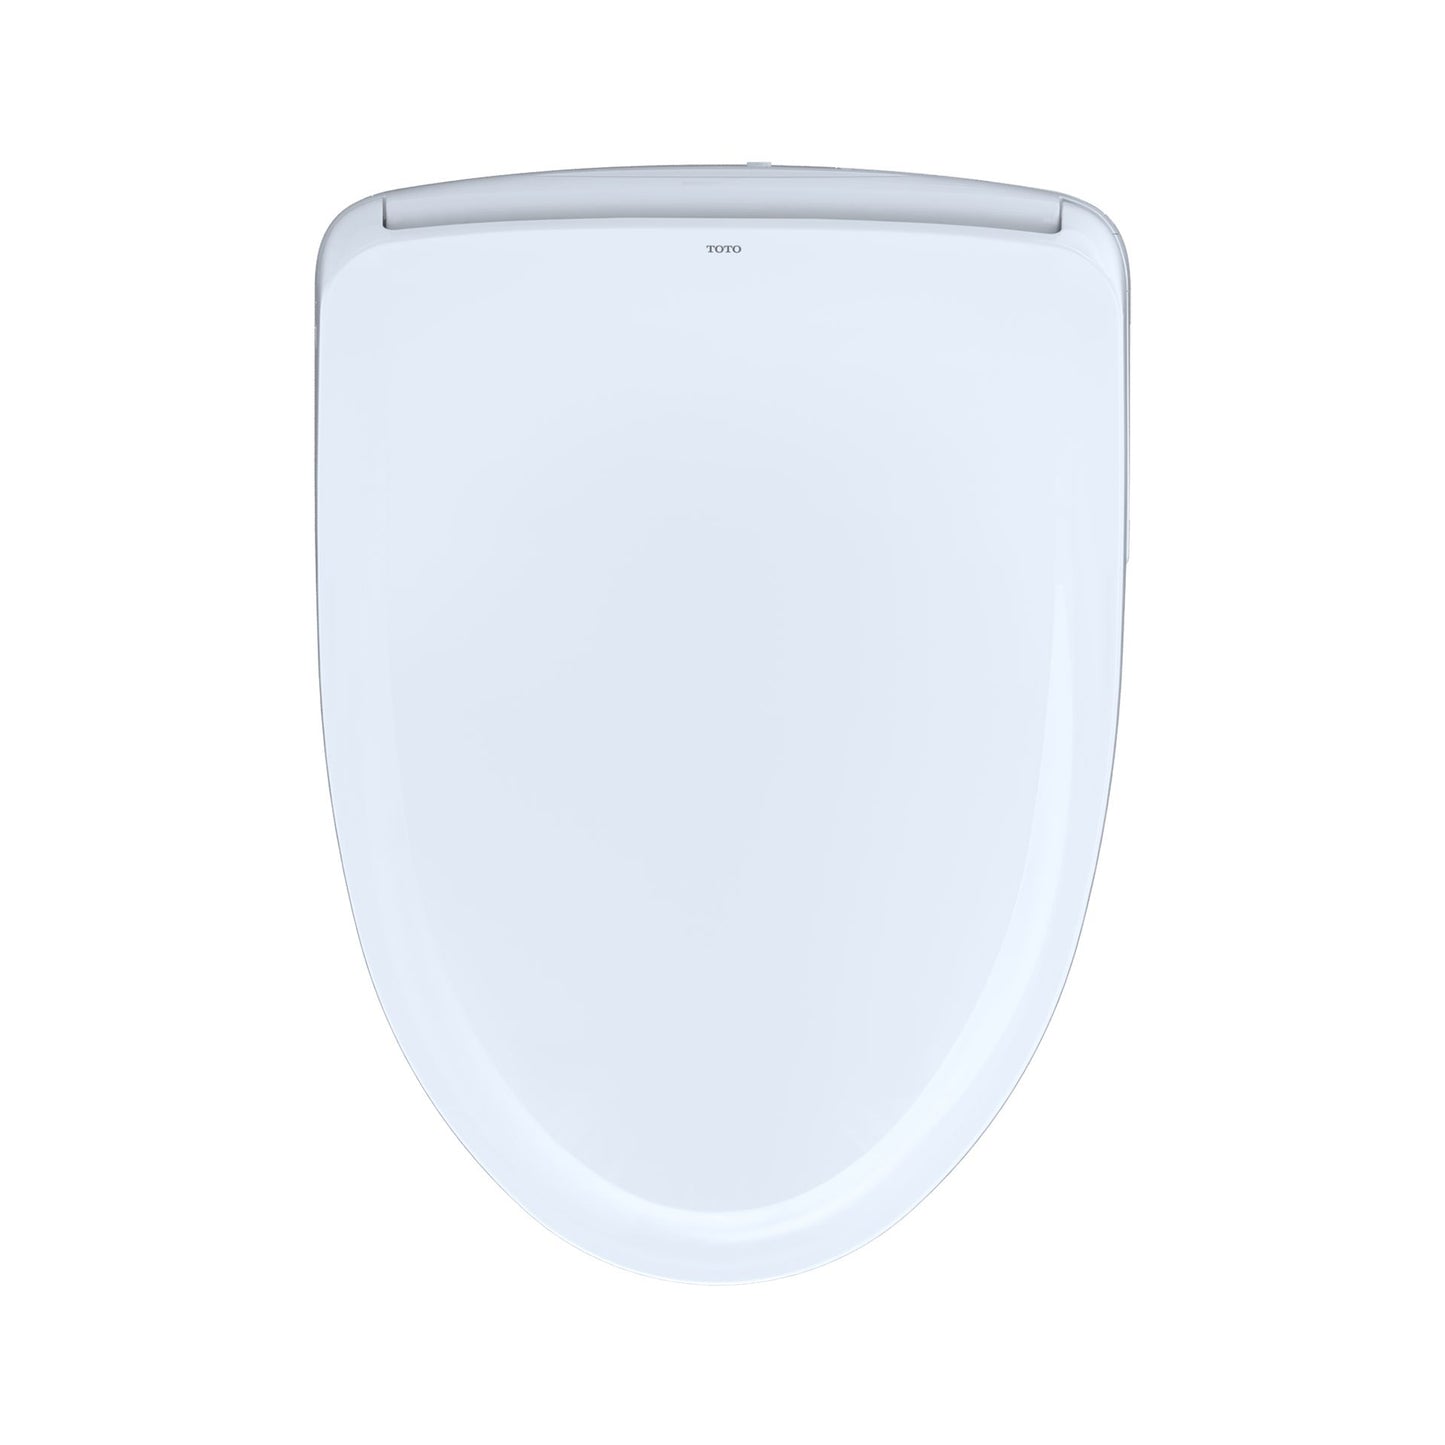 SW3054#01 - Washlet S550E Elongated Bidet Seat with Remote and Dual Action Spray- Cotton